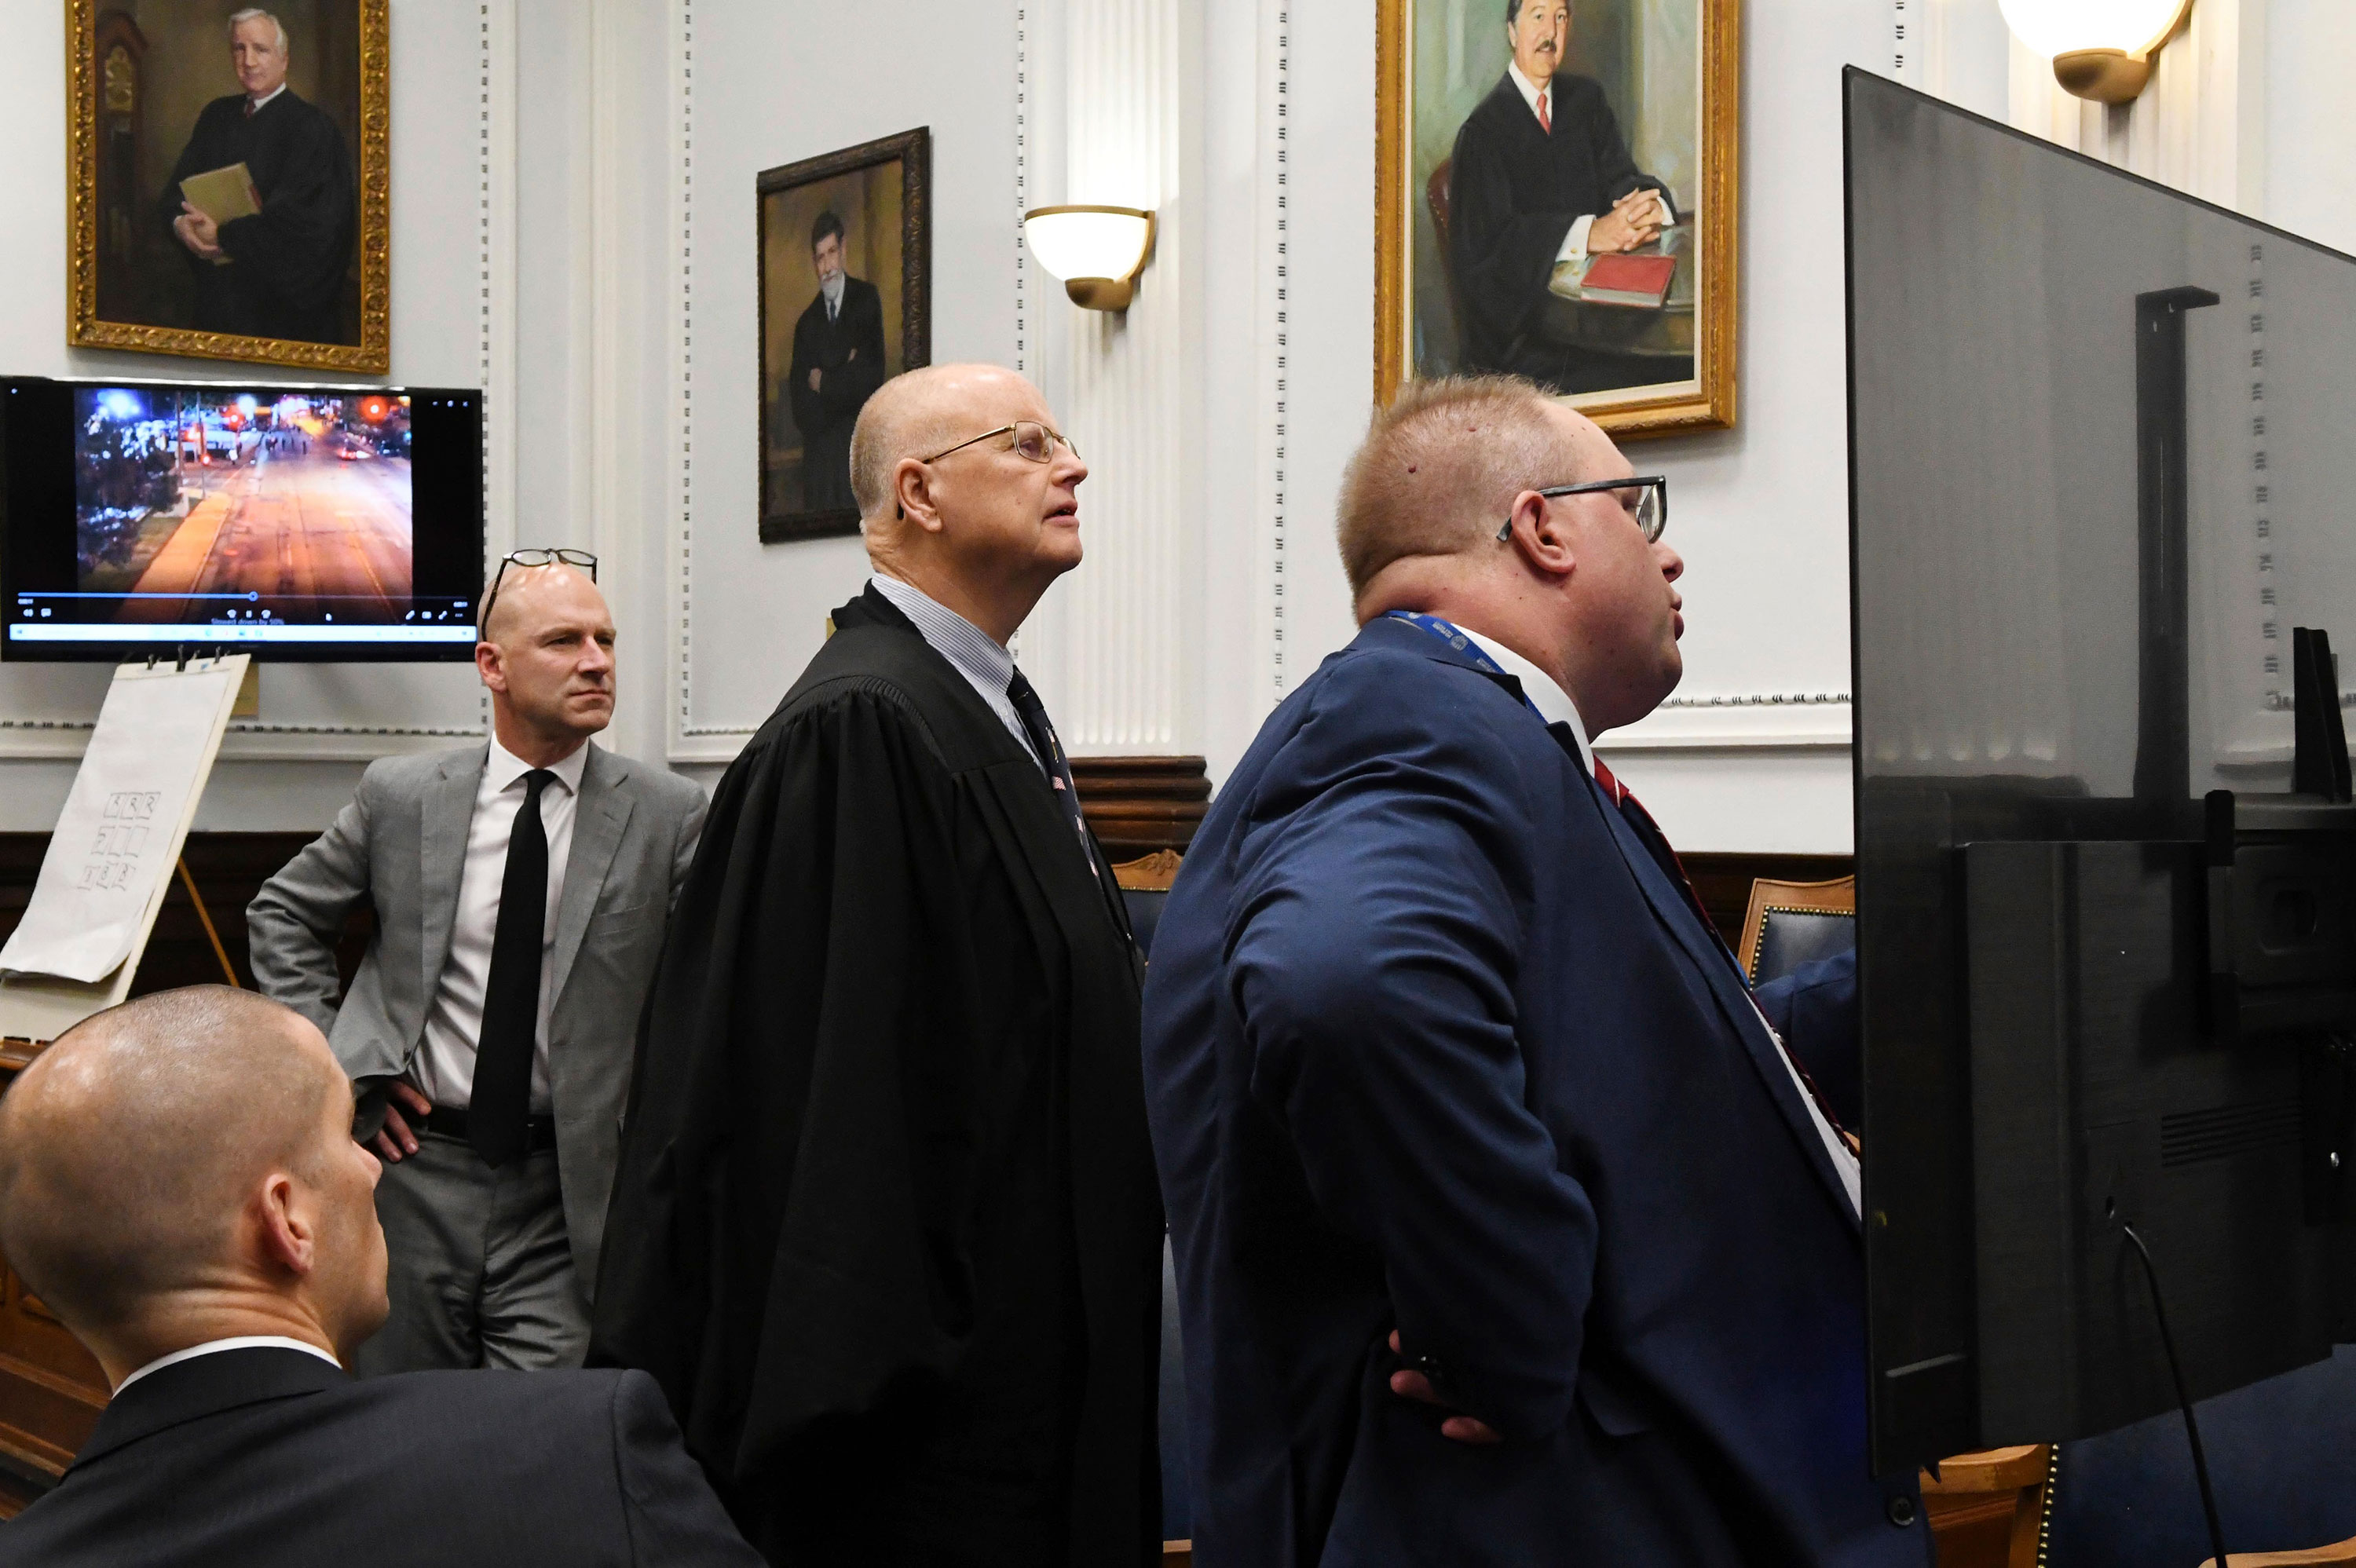 With the jury out of the room, Assistant District Attorney James Kraus, right, Judge Bruce E. Schroeder, center, and defense attorney Corey Chirafisi, rear left, look over a video monitor to examine photographic evidence during a dispute over the reliability of enlarged digital images during Kyle Rittenhouse's trial at the Kenosha County Courthouse in Kenosha, Wis., on Thursday, Nov. 11, 2021. Rittenhouse is accused of killing two people and wounding a third during a protest over police brutality in Kenosha last year.  (Mark Hertzberg/Pool Photo via AP)